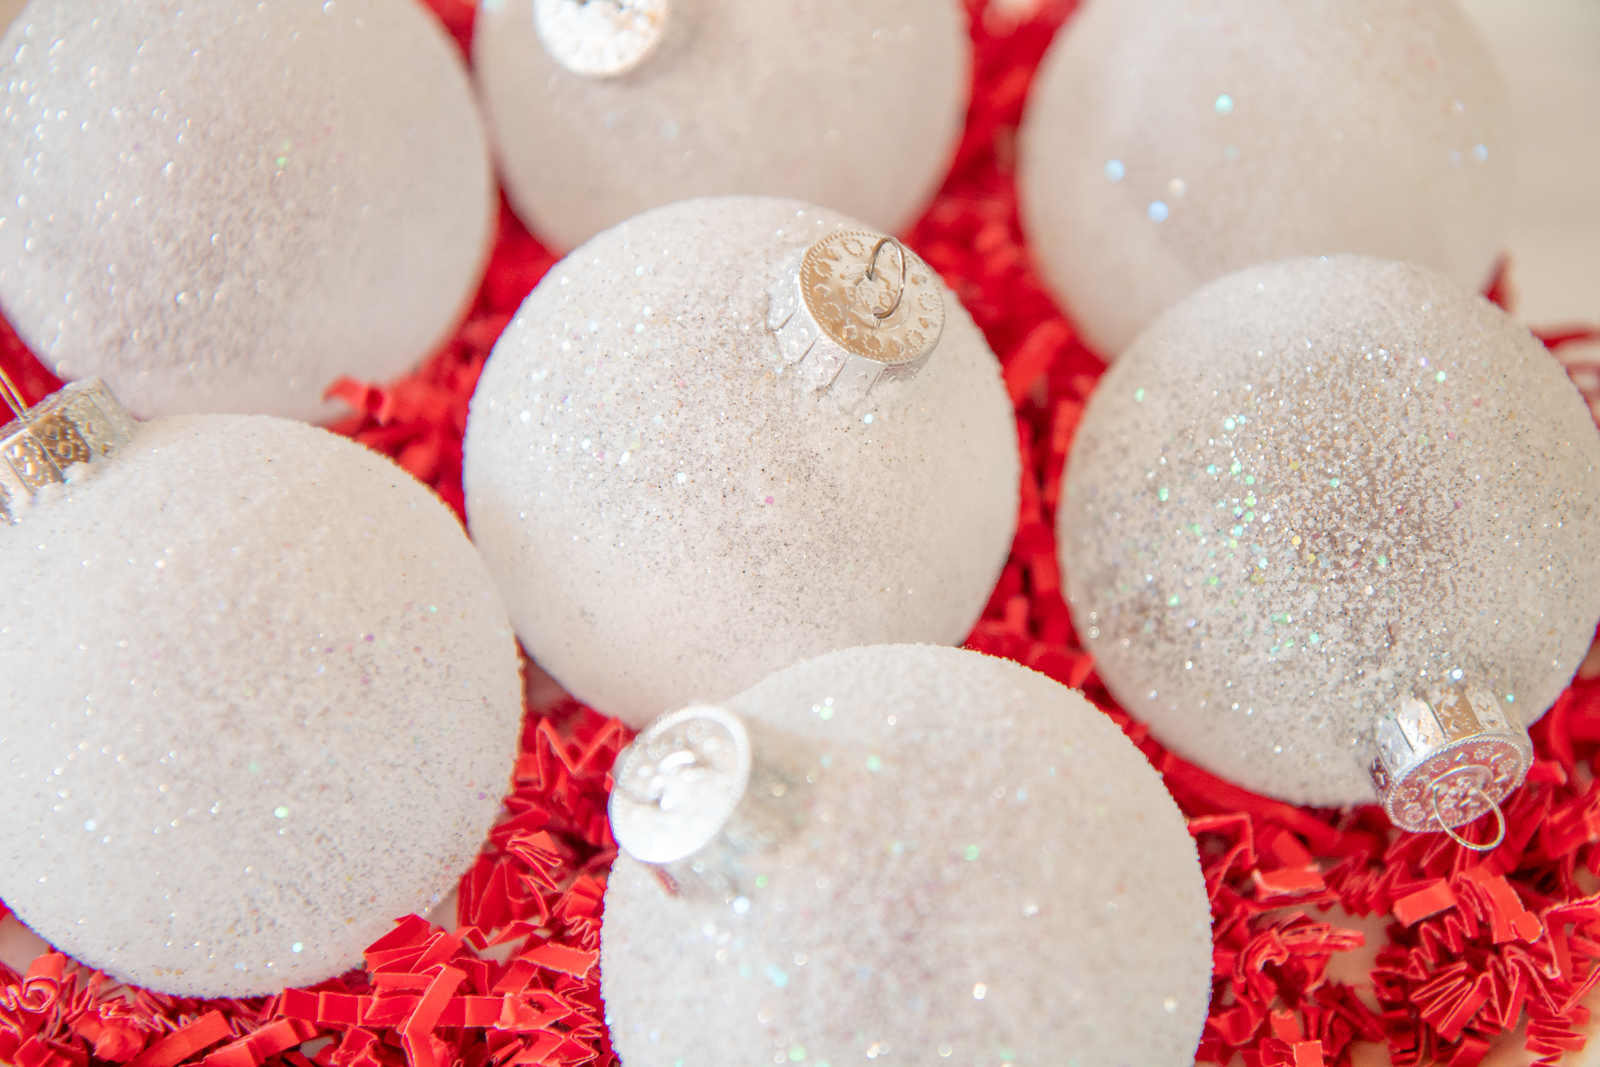 How to make frosted glitter ornaments